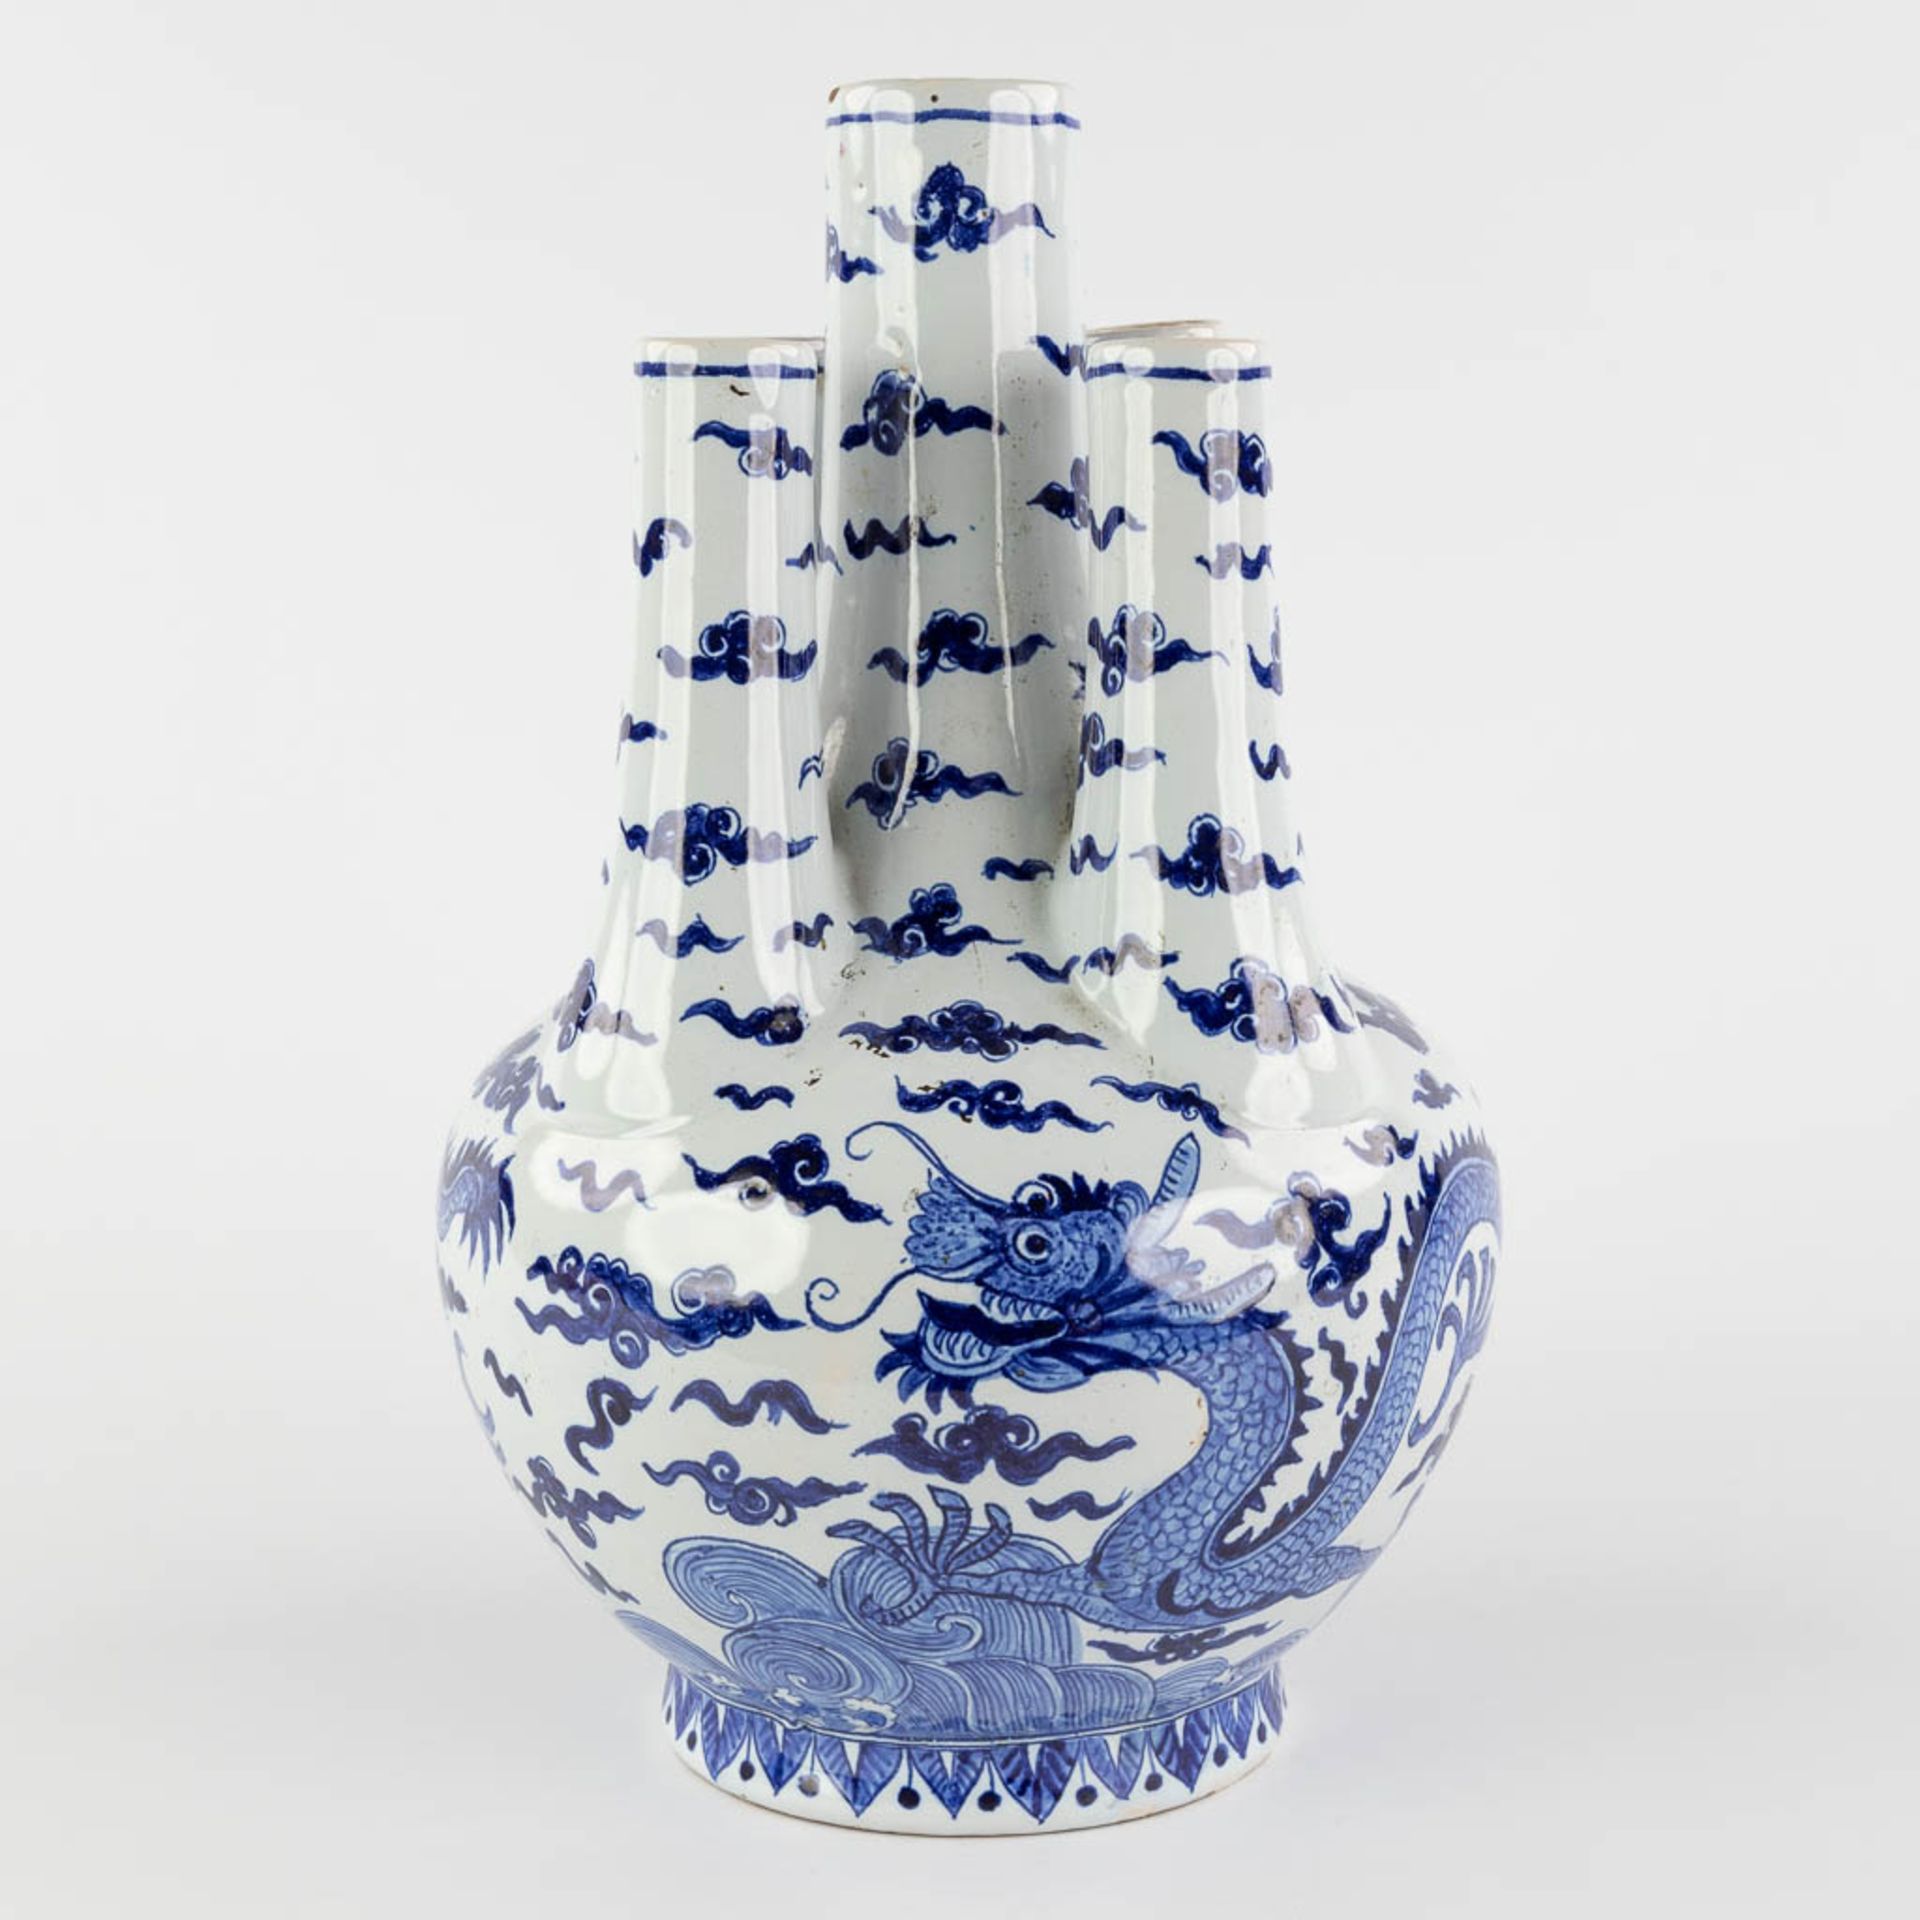 Charles-François Fourmaintraux-Courquin, a tulip vase with Chinoiserie dragon decor France. 19th C.